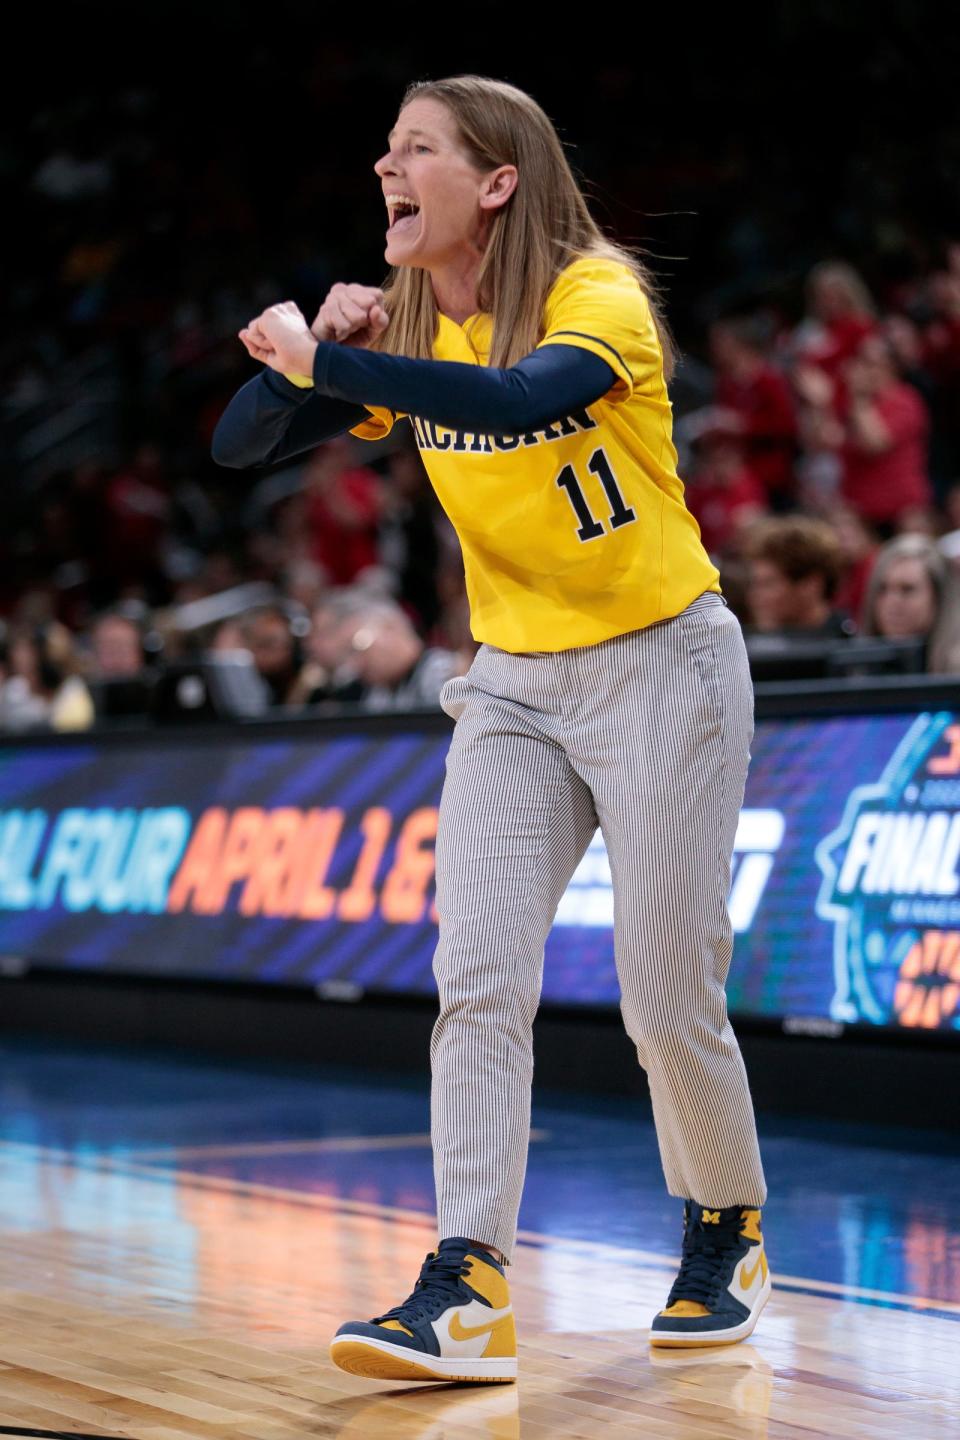 Michigan Wolverines coach Kim Barnes Arico gives directions during the game against the South Dakota Coyotes in the Wichita regional semifinals of the women's college basketball NCAA Tournament at INTRUST Bank Arena.